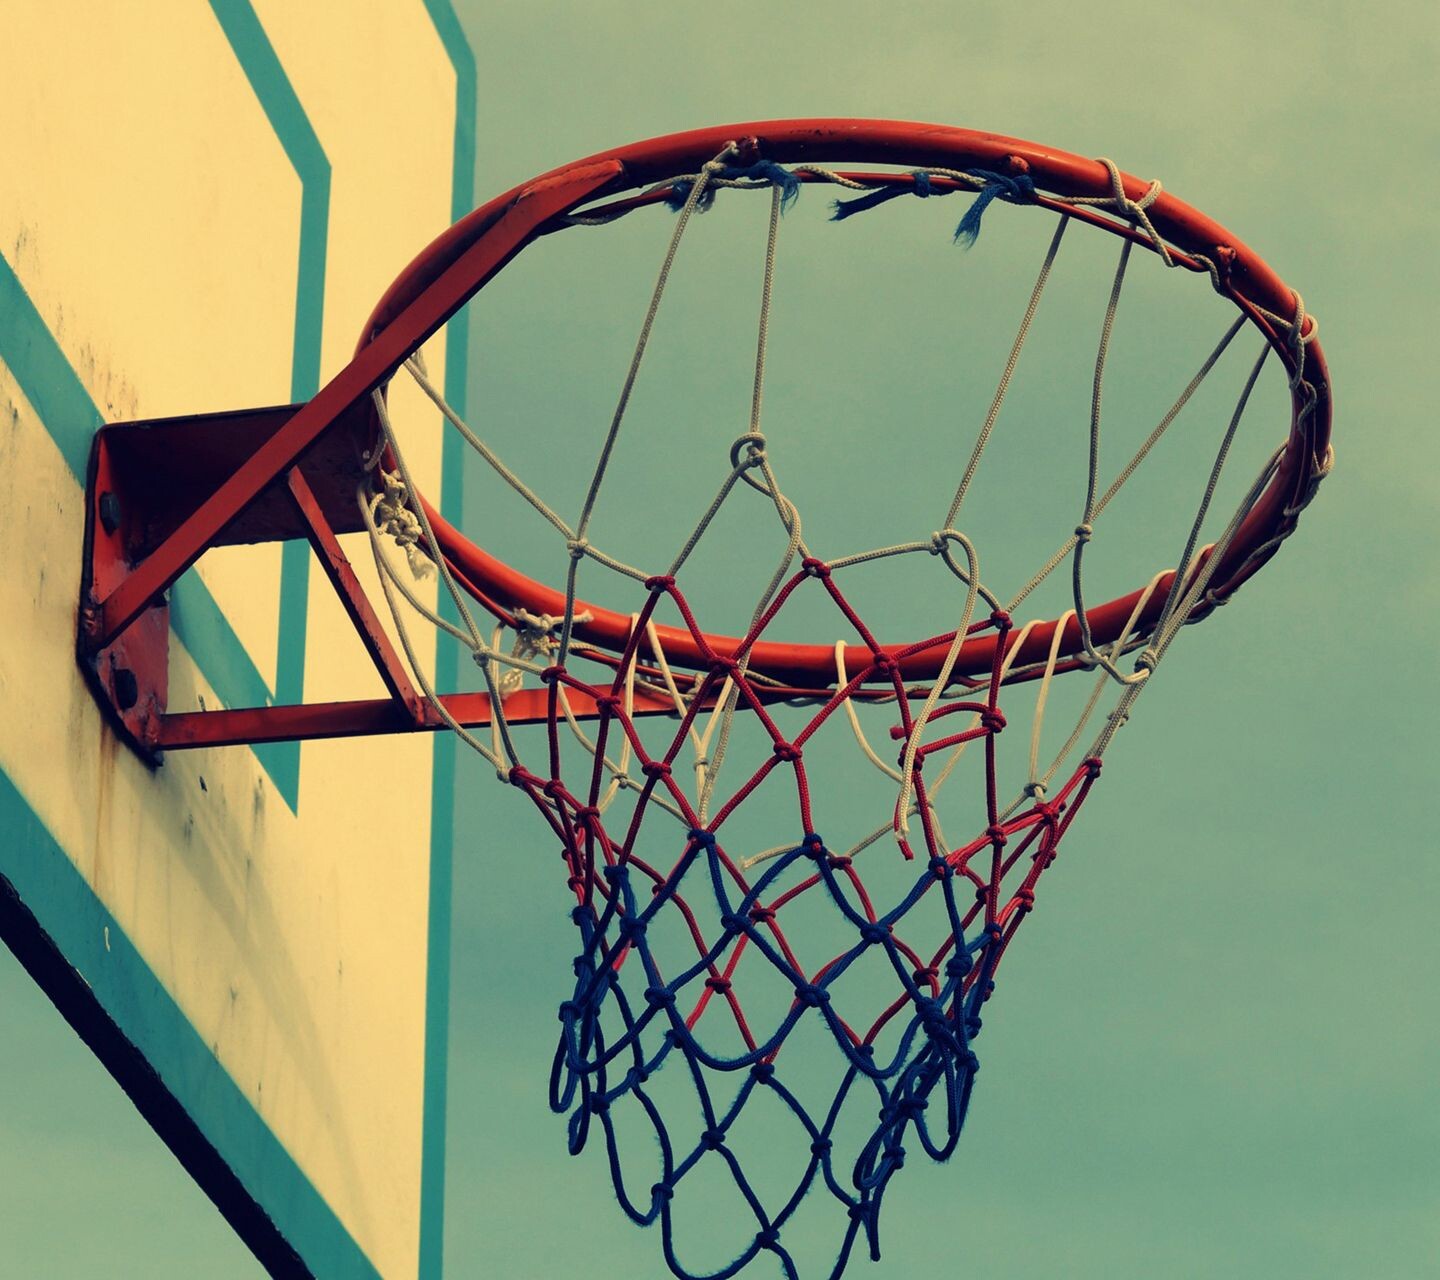 Basketball Wallpaper: HD, 4K, 5K for PC and Mobile. Download free image for iPhone, Android